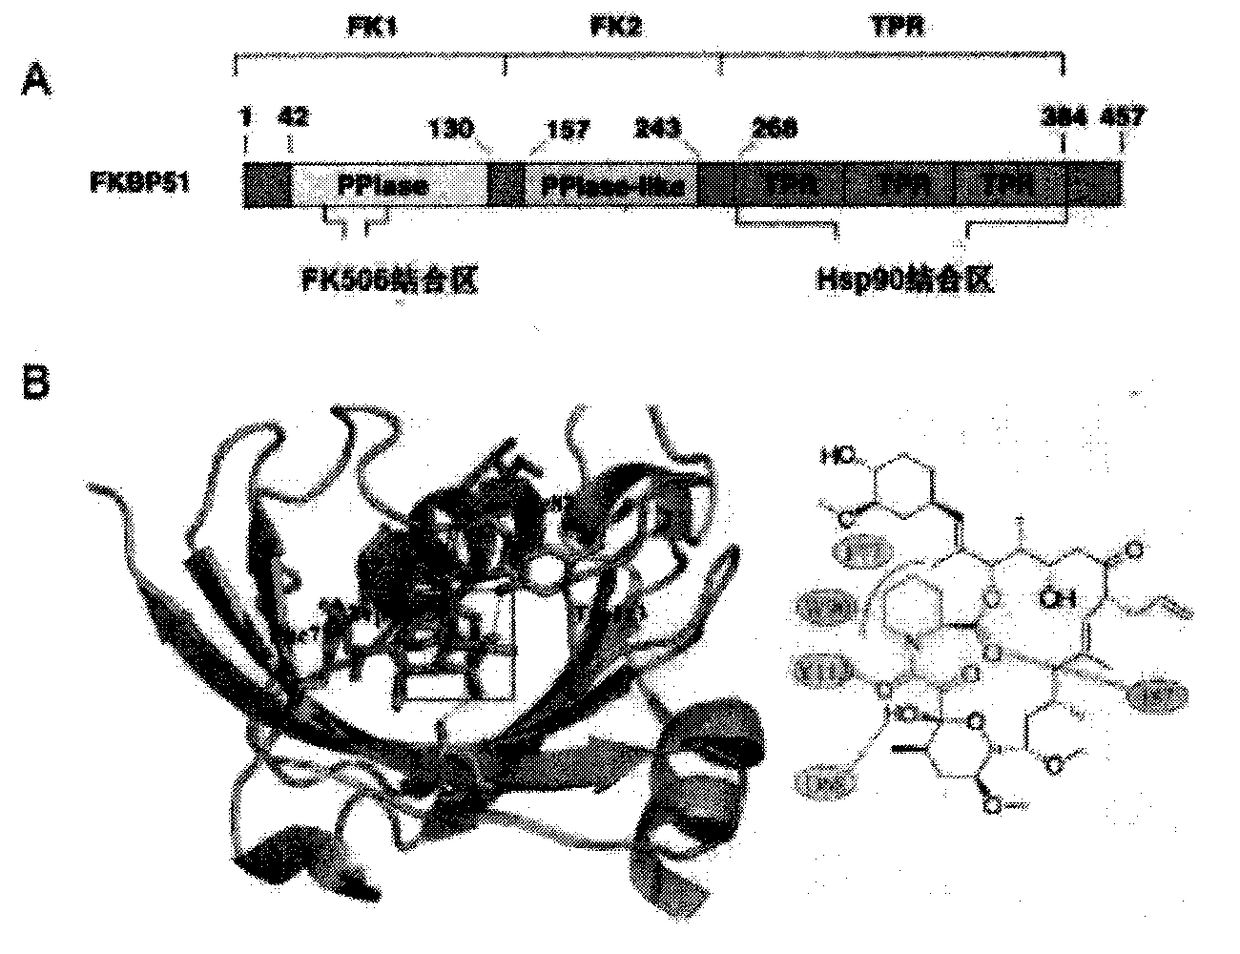 Lead compounds, screening methods and applications targeting human fkbp51 protein